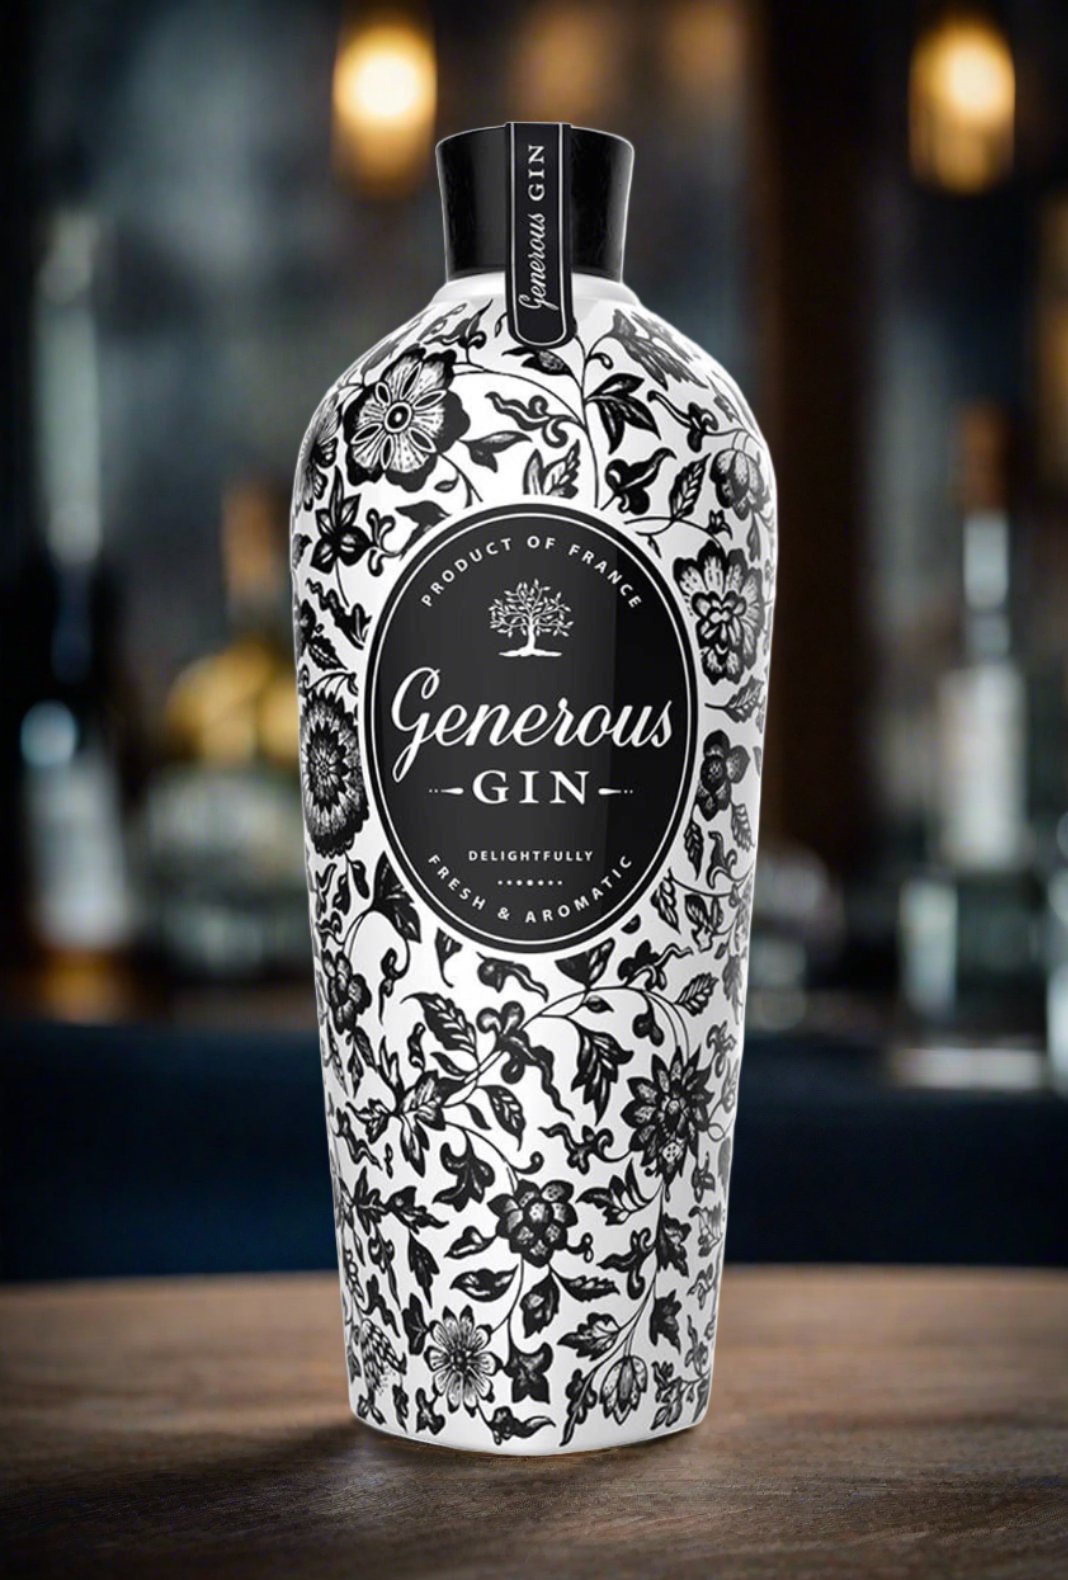 Generous Gin 44% 700ml | Gin | Shop online at Spirits of France